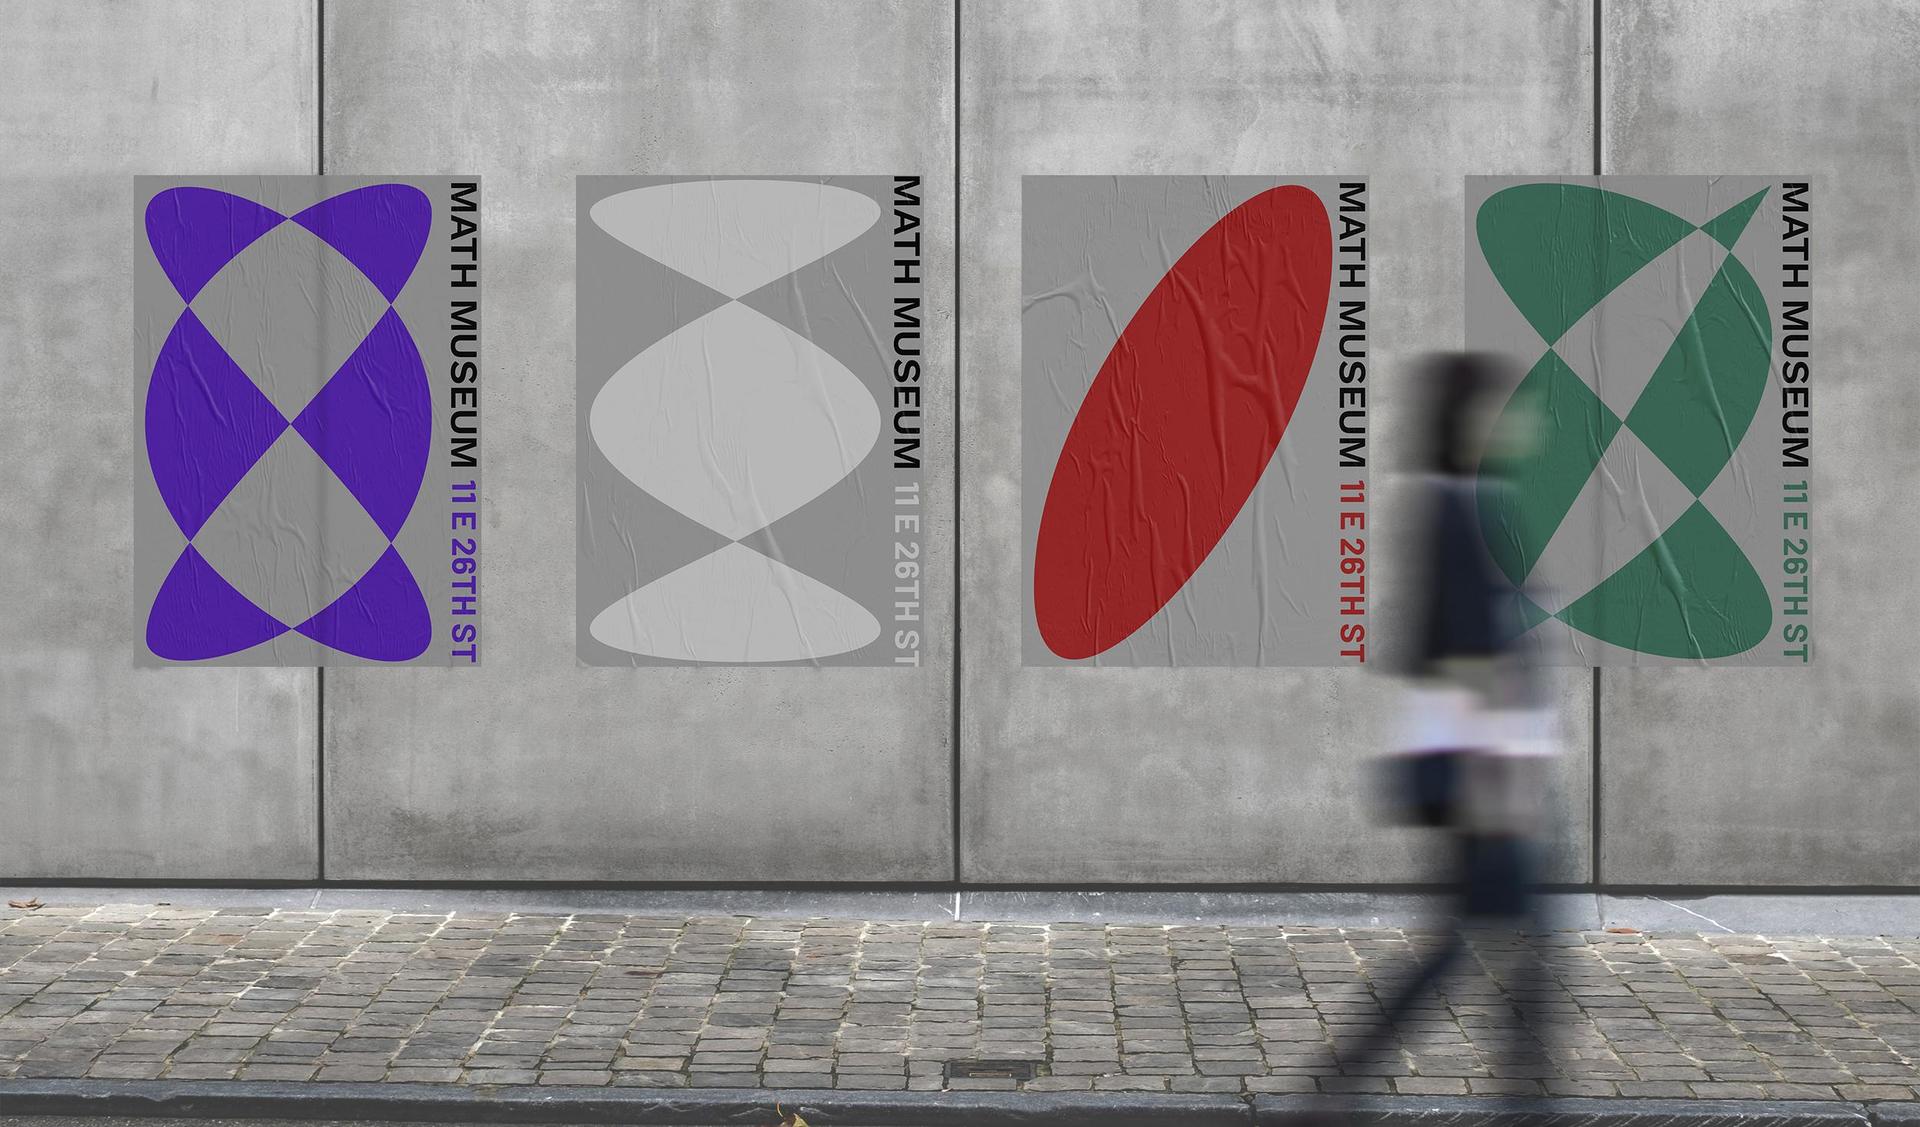 Poster designs for Math Museum